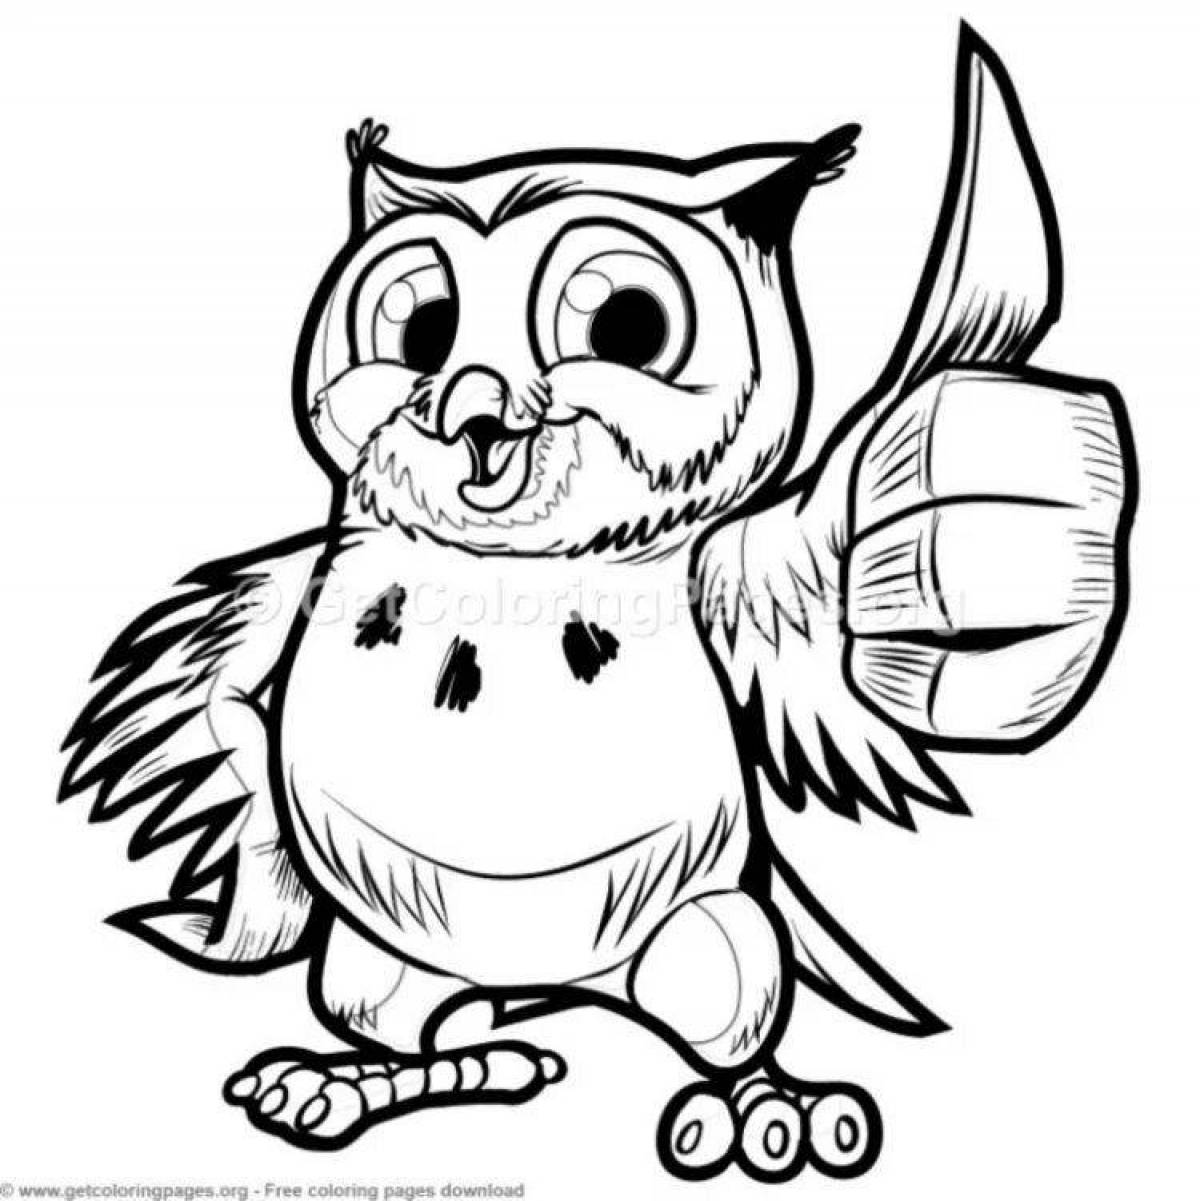 Live smart owl coloring book